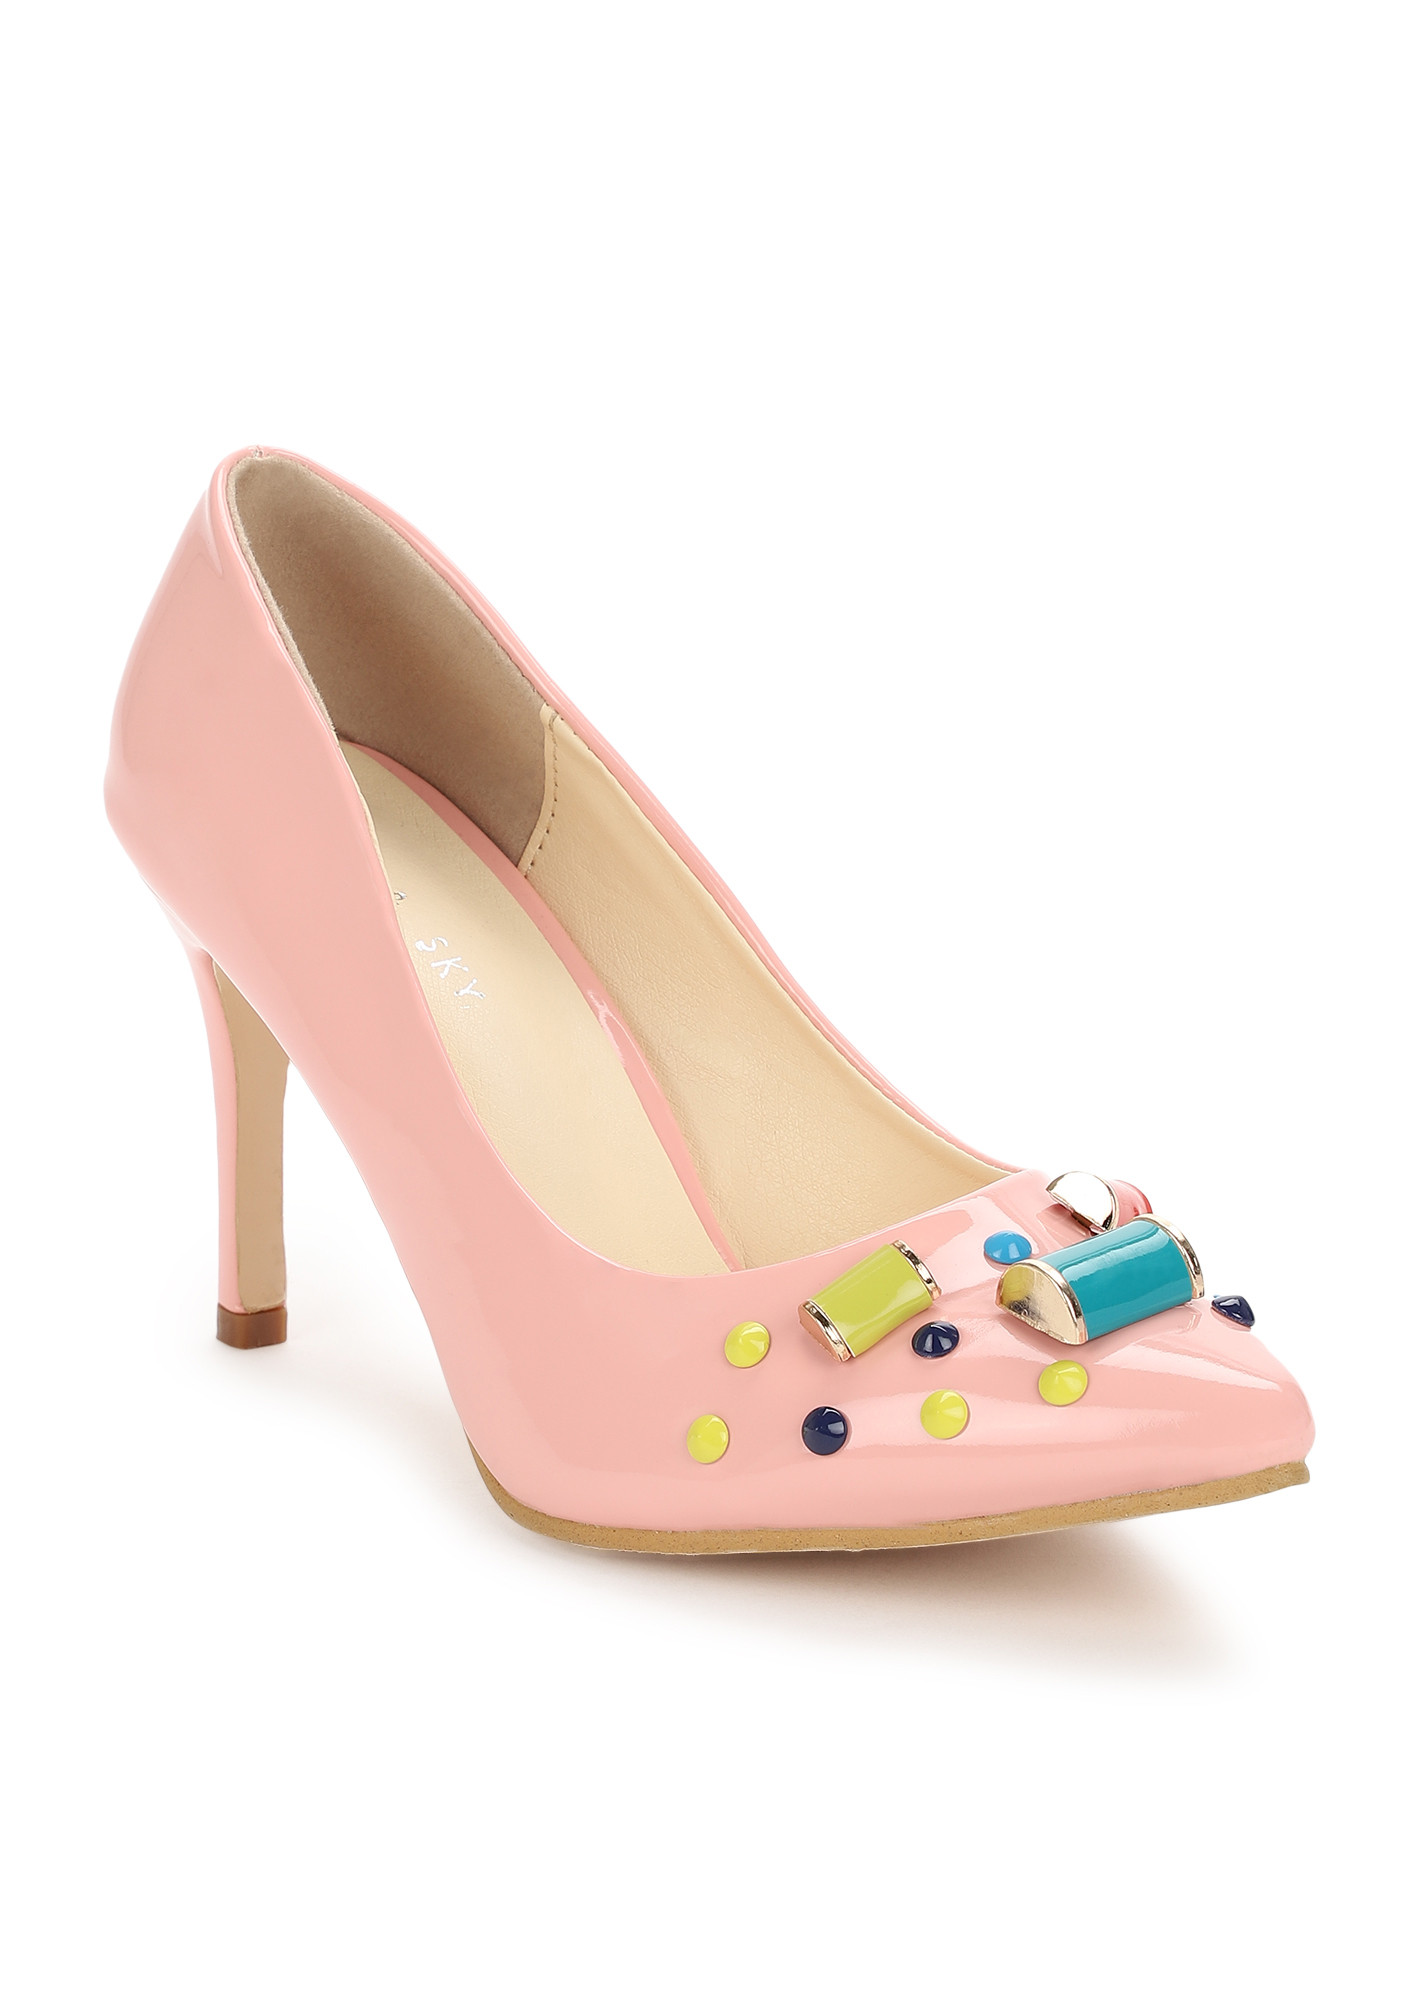 GEMS AND CANDIES BABY PINK PUMPS